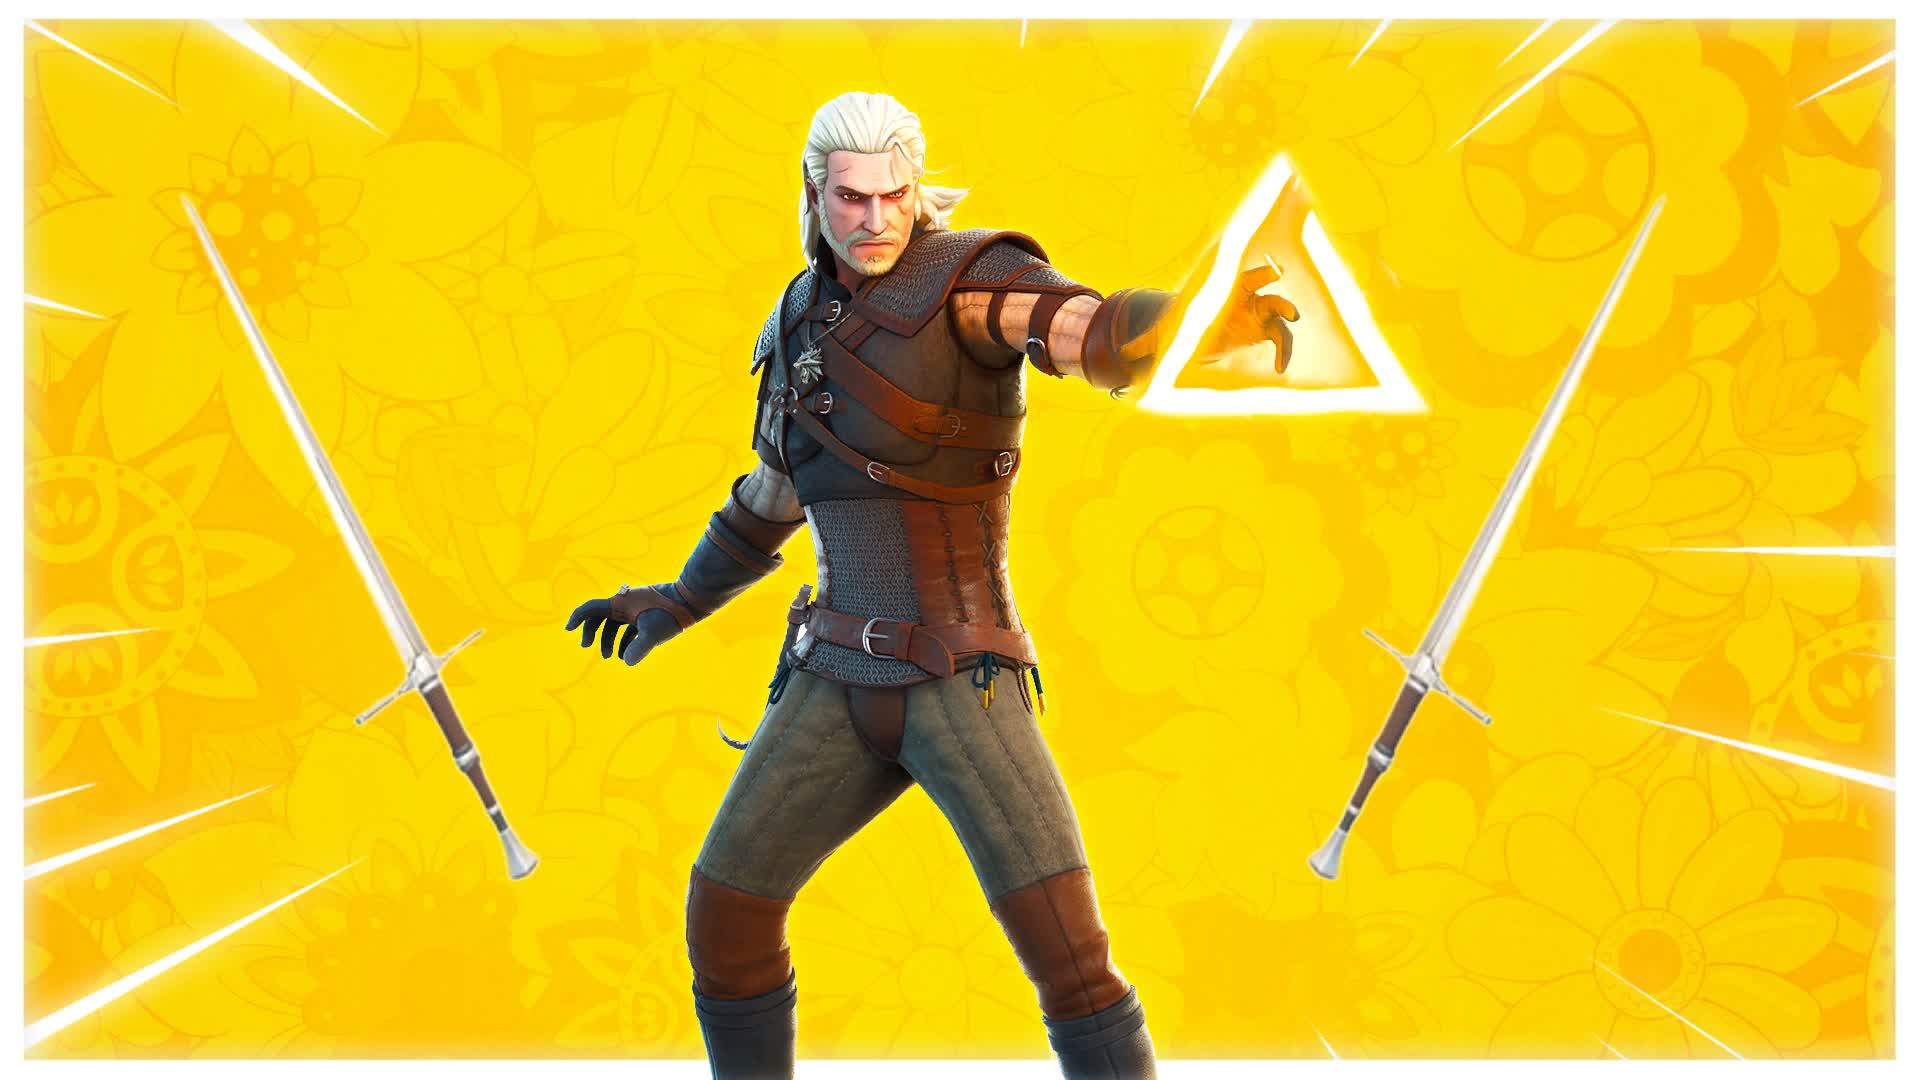 Geralt - FREE FOR ALL